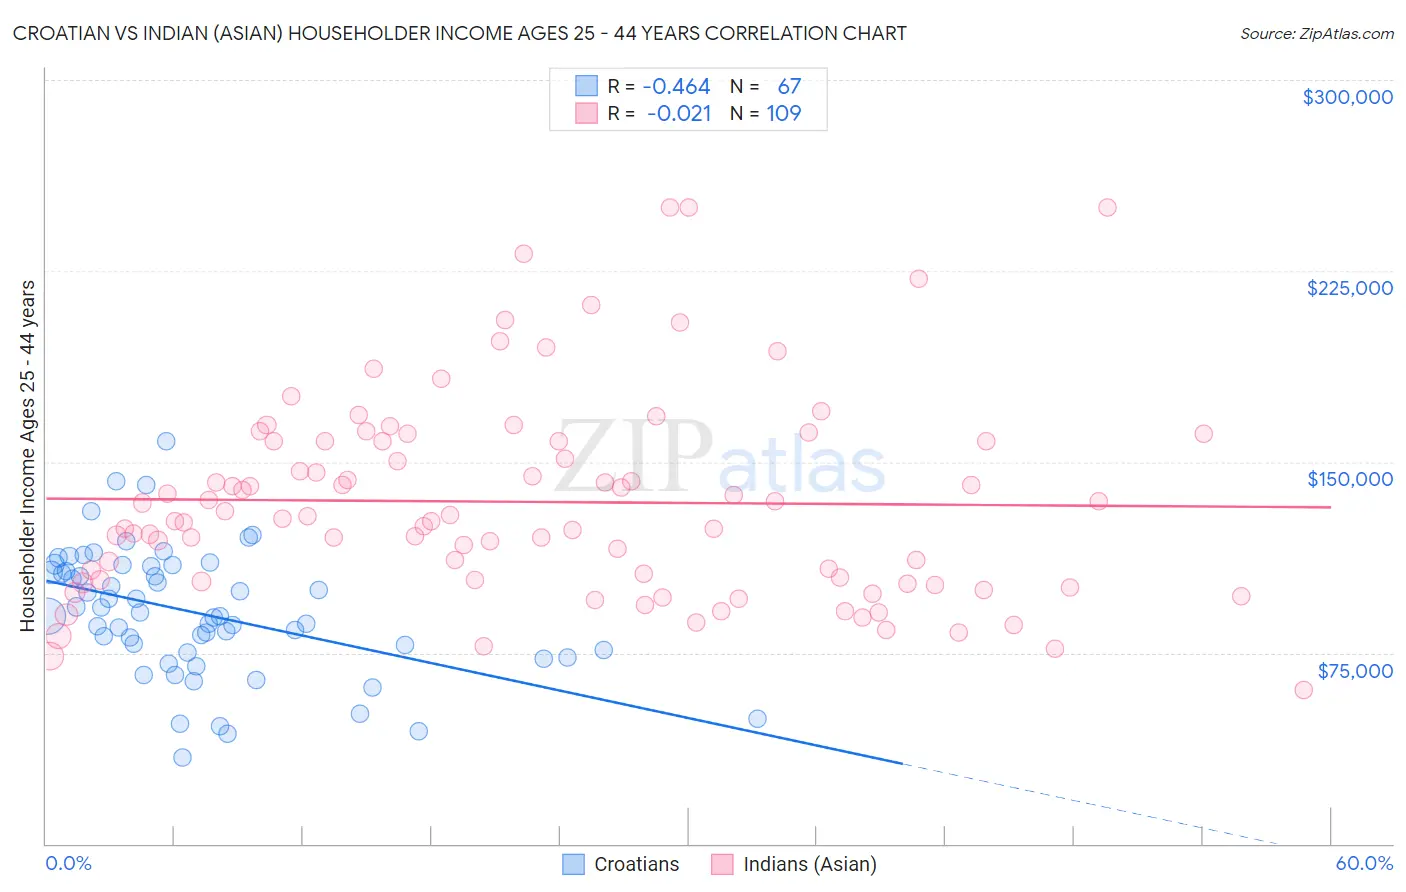 Croatian vs Indian (Asian) Householder Income Ages 25 - 44 years